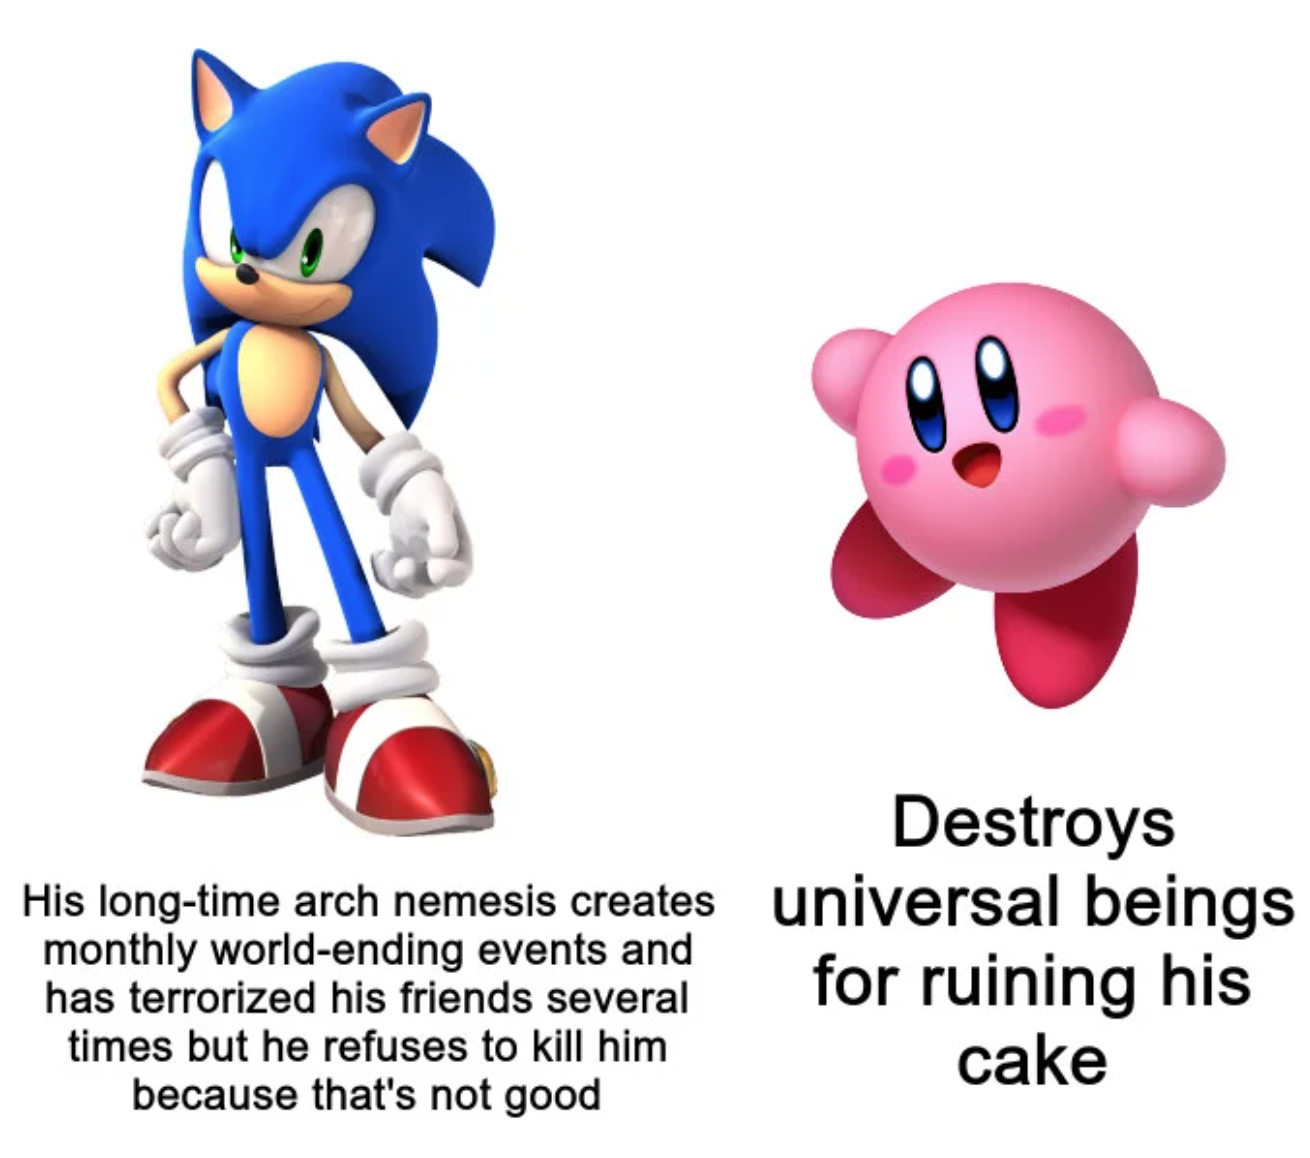 sonic the hedgehog - B Destroys His longtime arch nemesis creates universal beings monthly worldending events and has terrorized his friends several for ruining his times but he refuses to kill him cake because that's not good